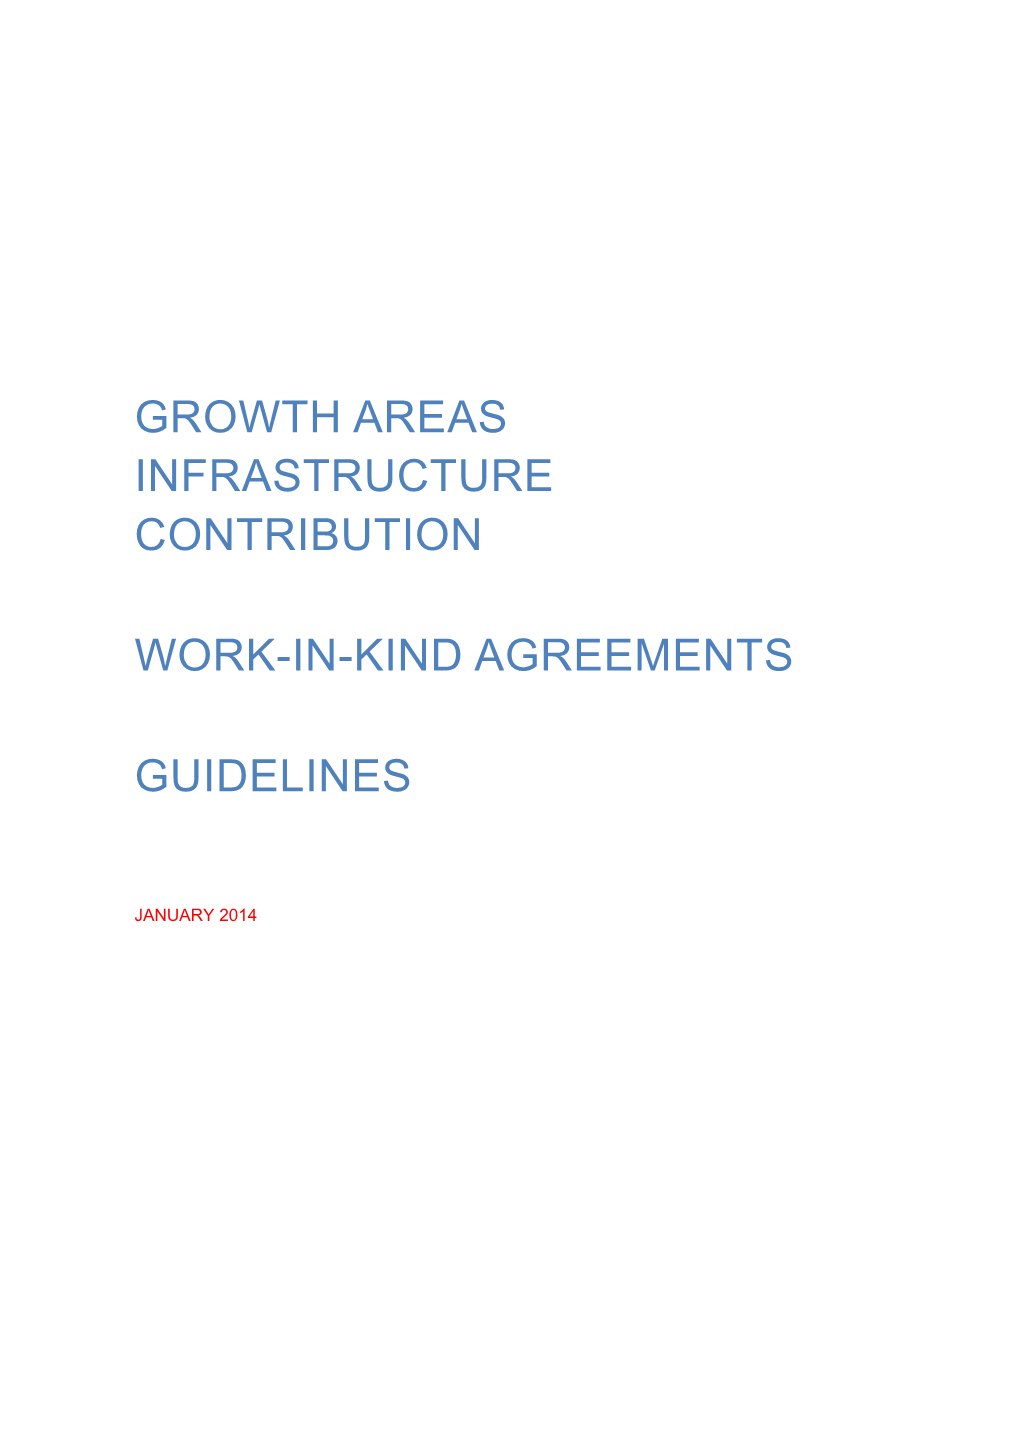 Consolidated Markup of Guidelines 30 July 2013 - HSF Changes 1.8.13